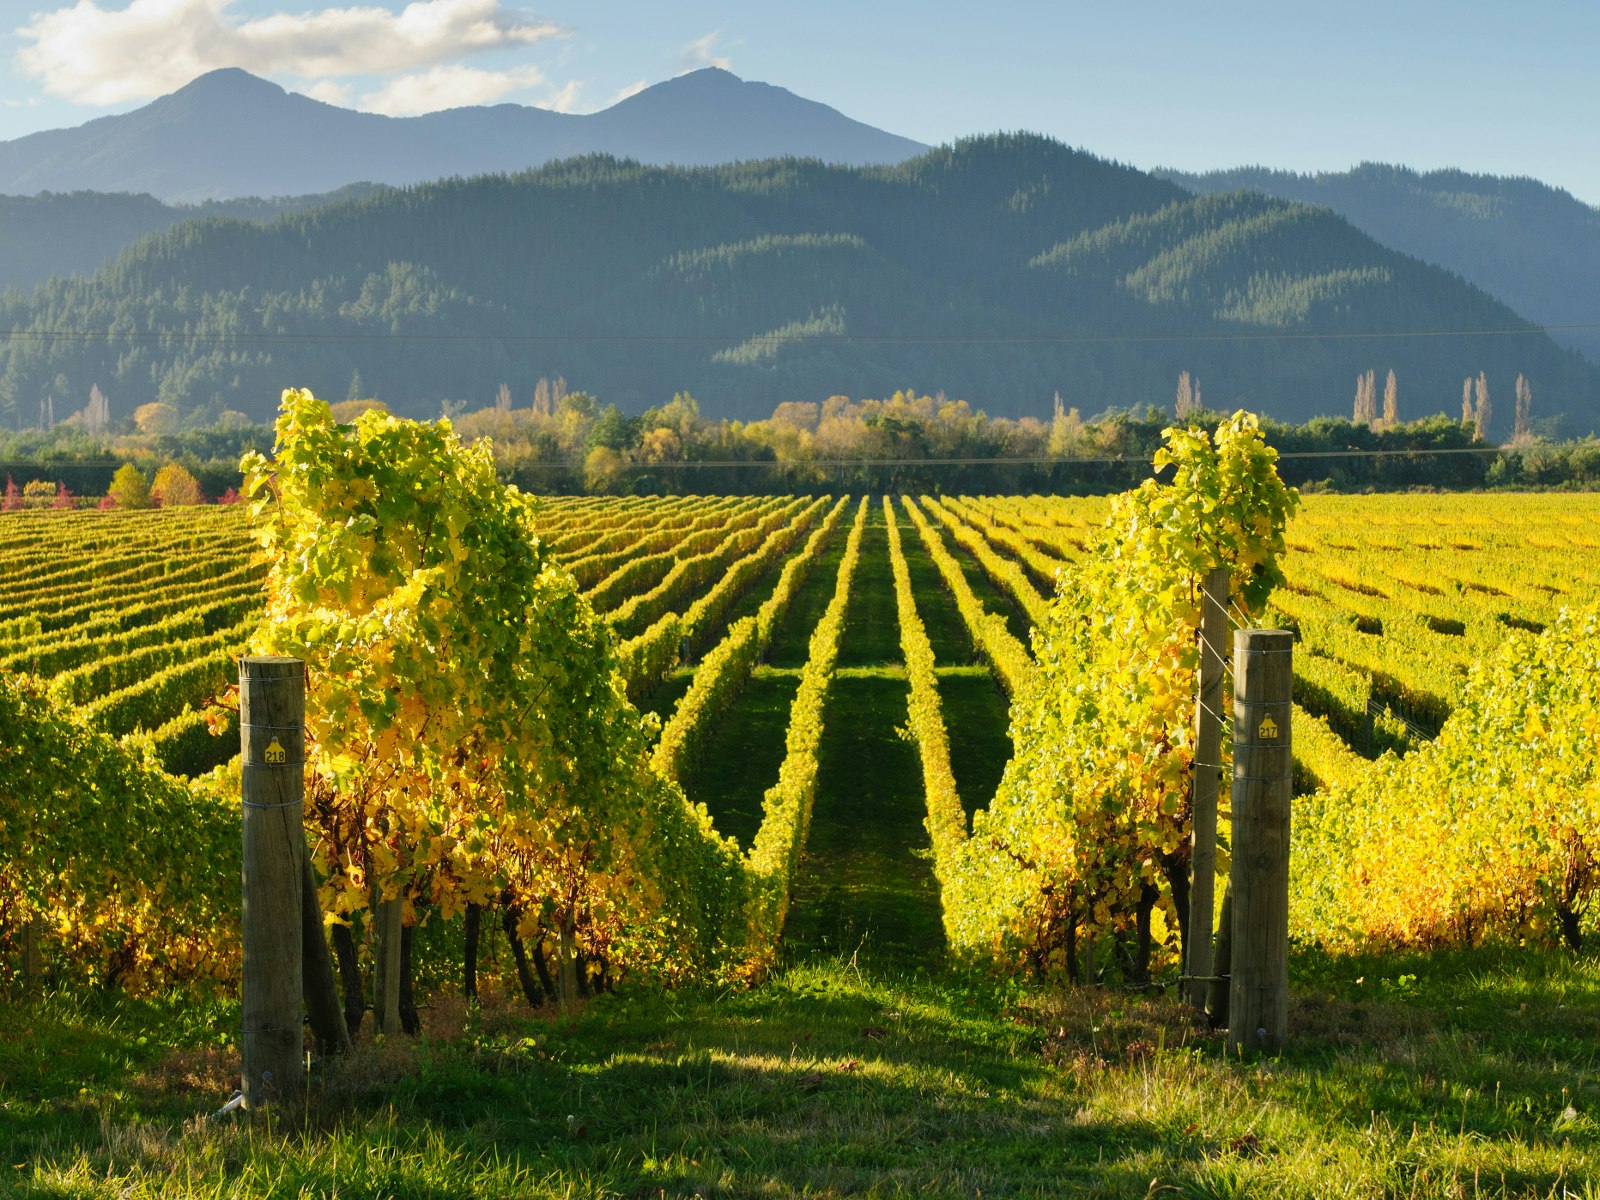 With 23,000 hectares of vineyards it's no wonder Marlborough is the ultimate icon in New Zealand winemaking © Jeffrey B. Banke / Shutterstock